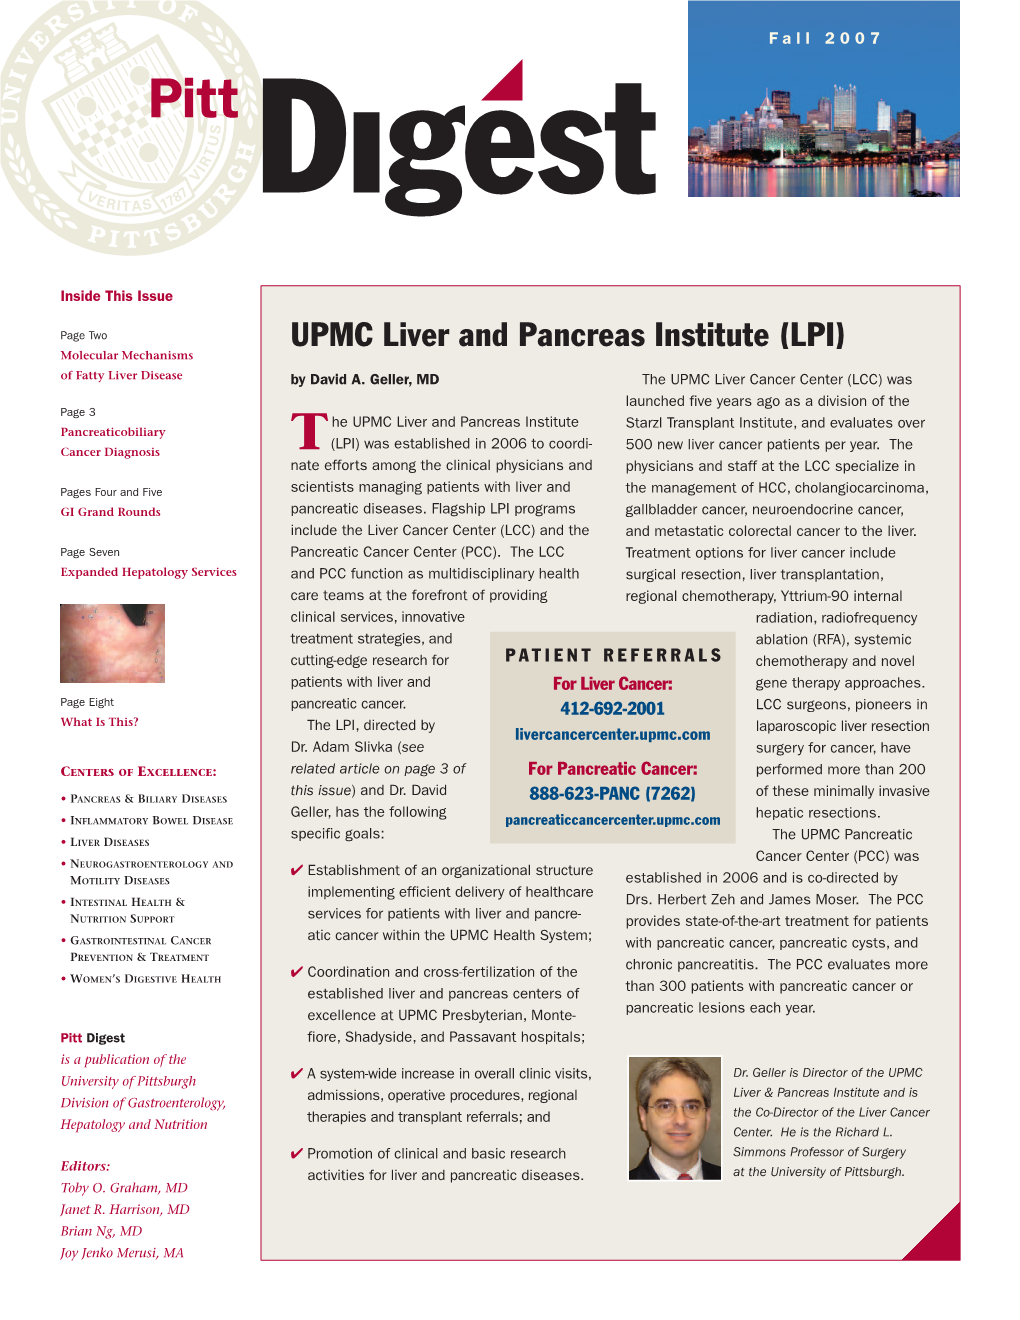 UPMC Liver and Pancreas Institute (LPI) Molecular Mechanisms of Fatty Liver Disease by David A